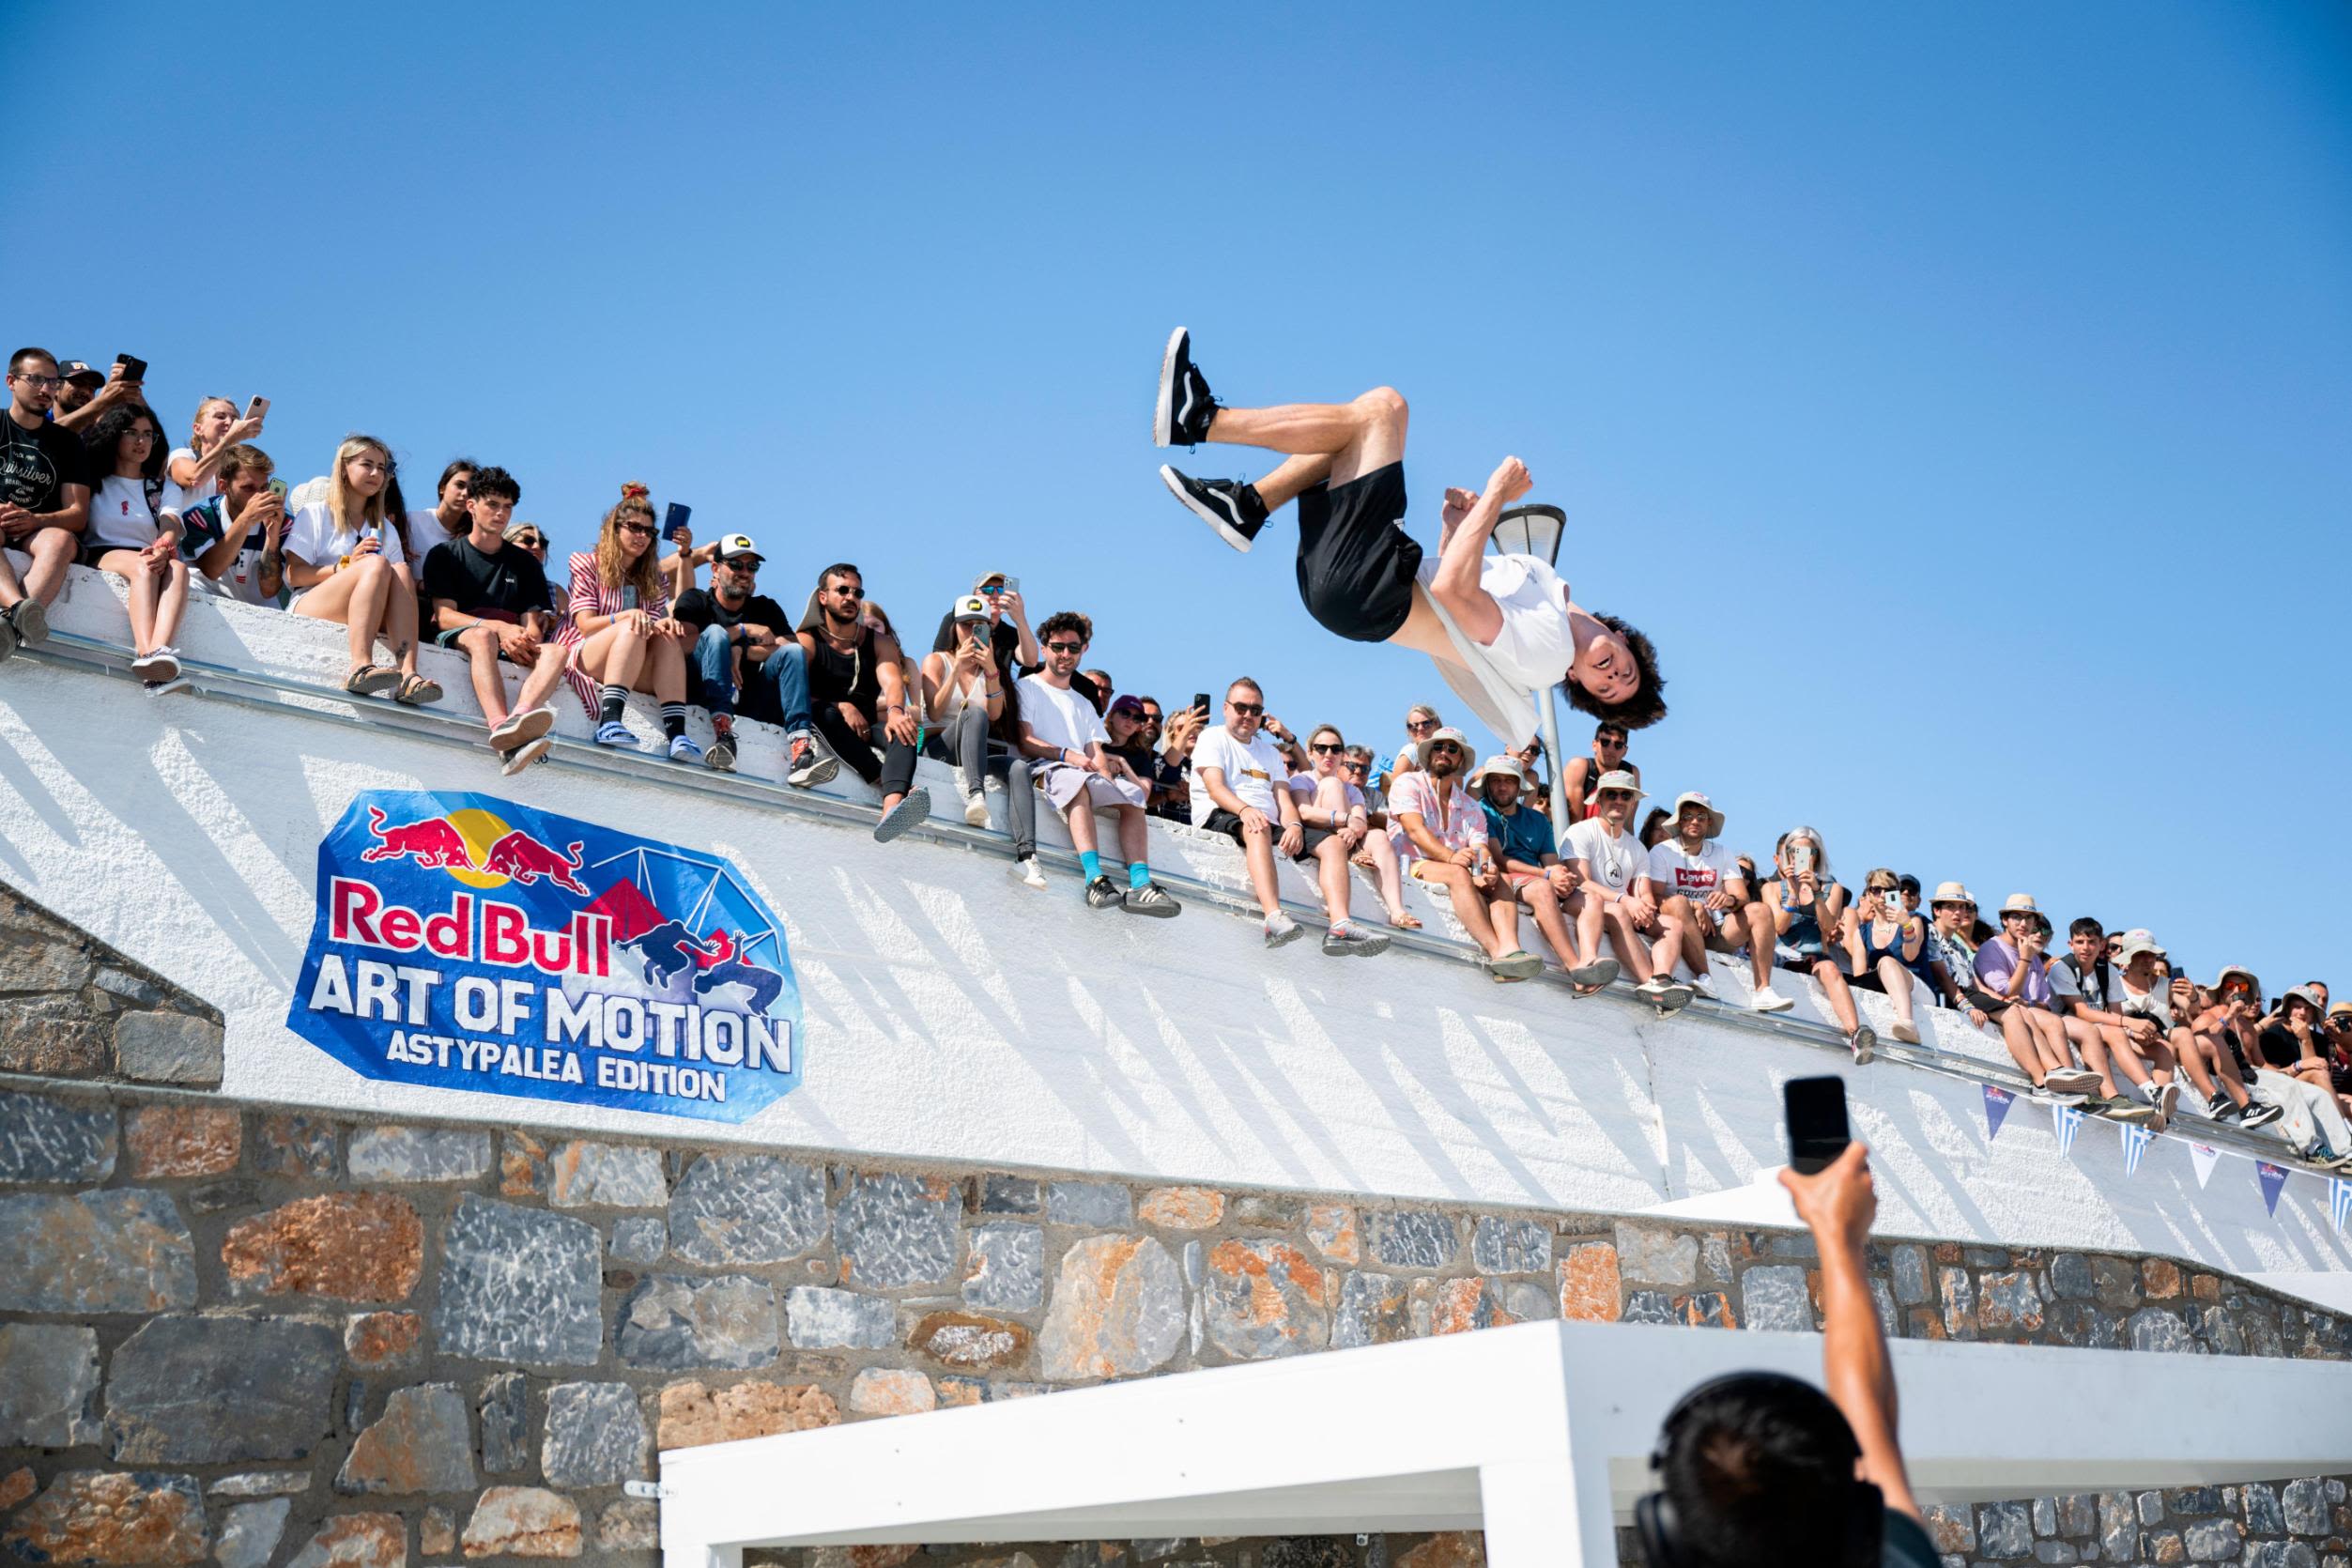 Meet the parkour athletes defying and gravity at Red Bull Art Motion. | CNN